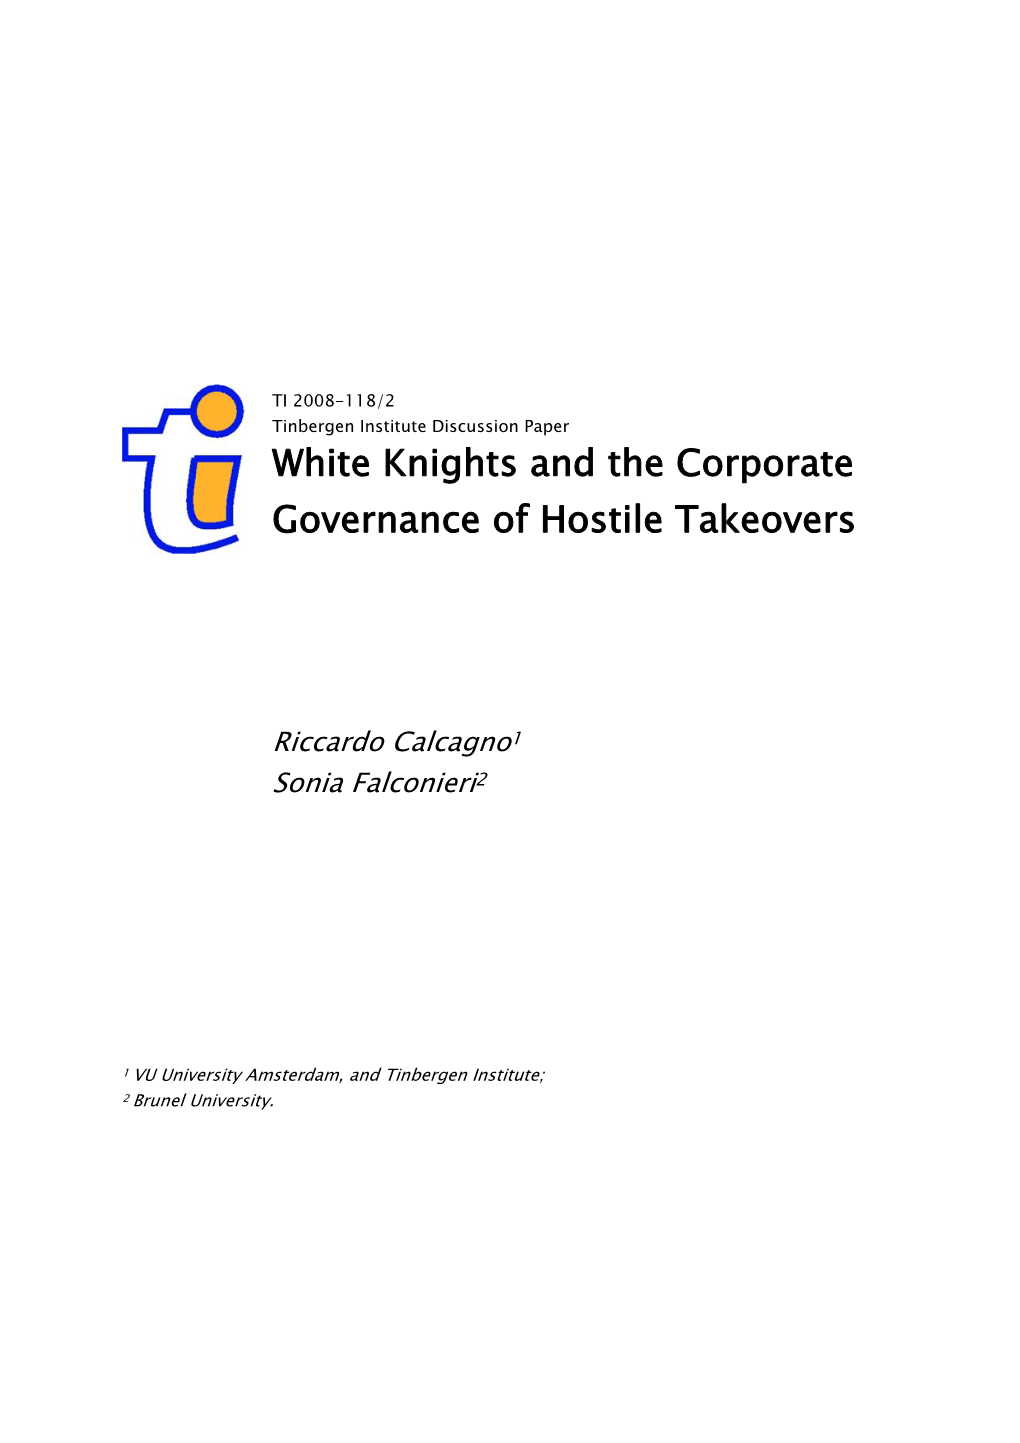 White Knights and the Corporate Governance of Hostile Takeovers